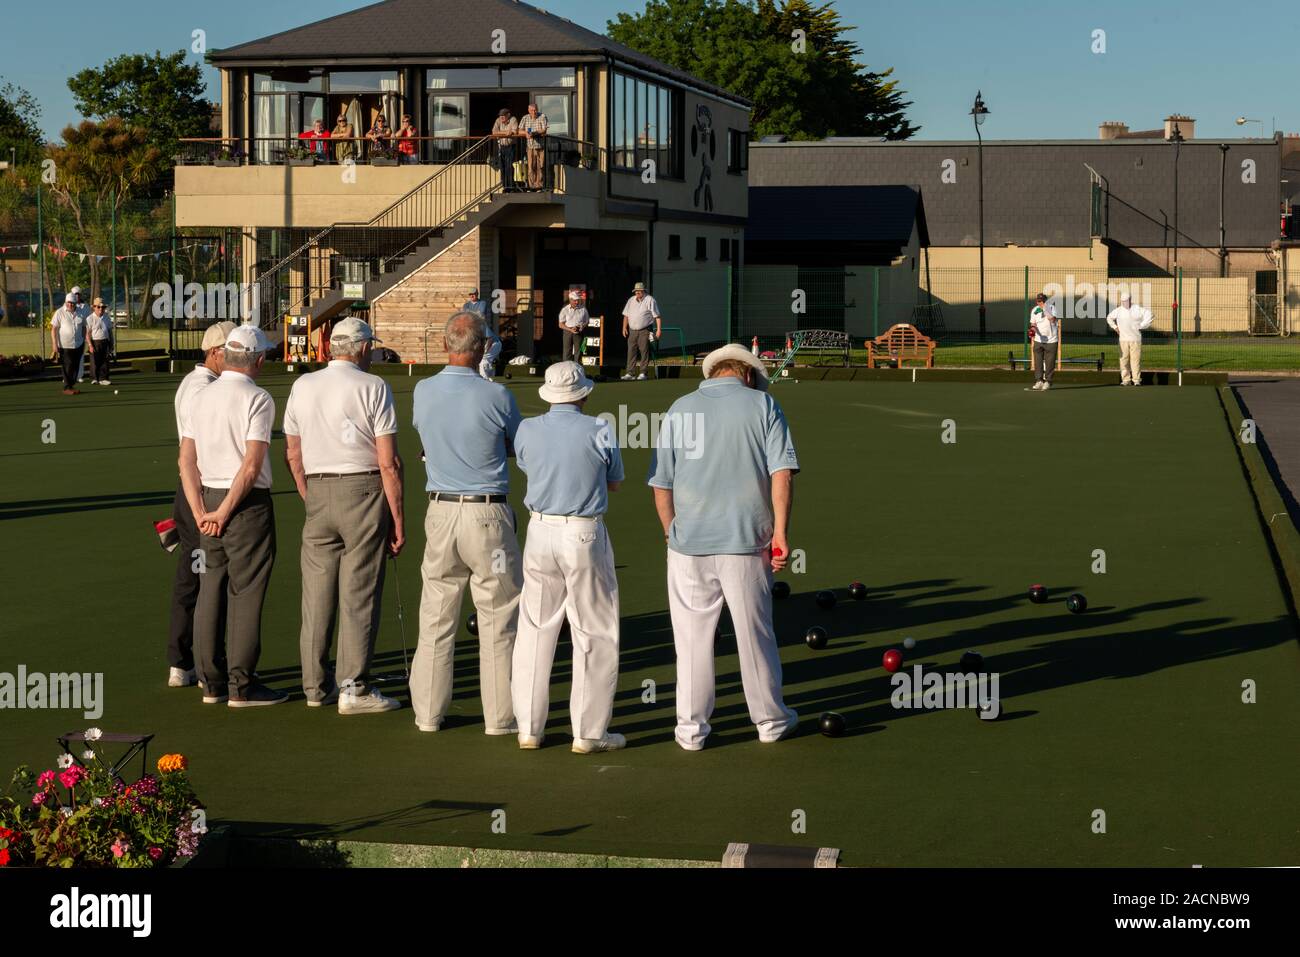 Retirement Ireland Senior men playing lawn bowls at The Causeway Tennis and Bowls Club in Dungarvan, County Waterford, Ireland Stock Photo